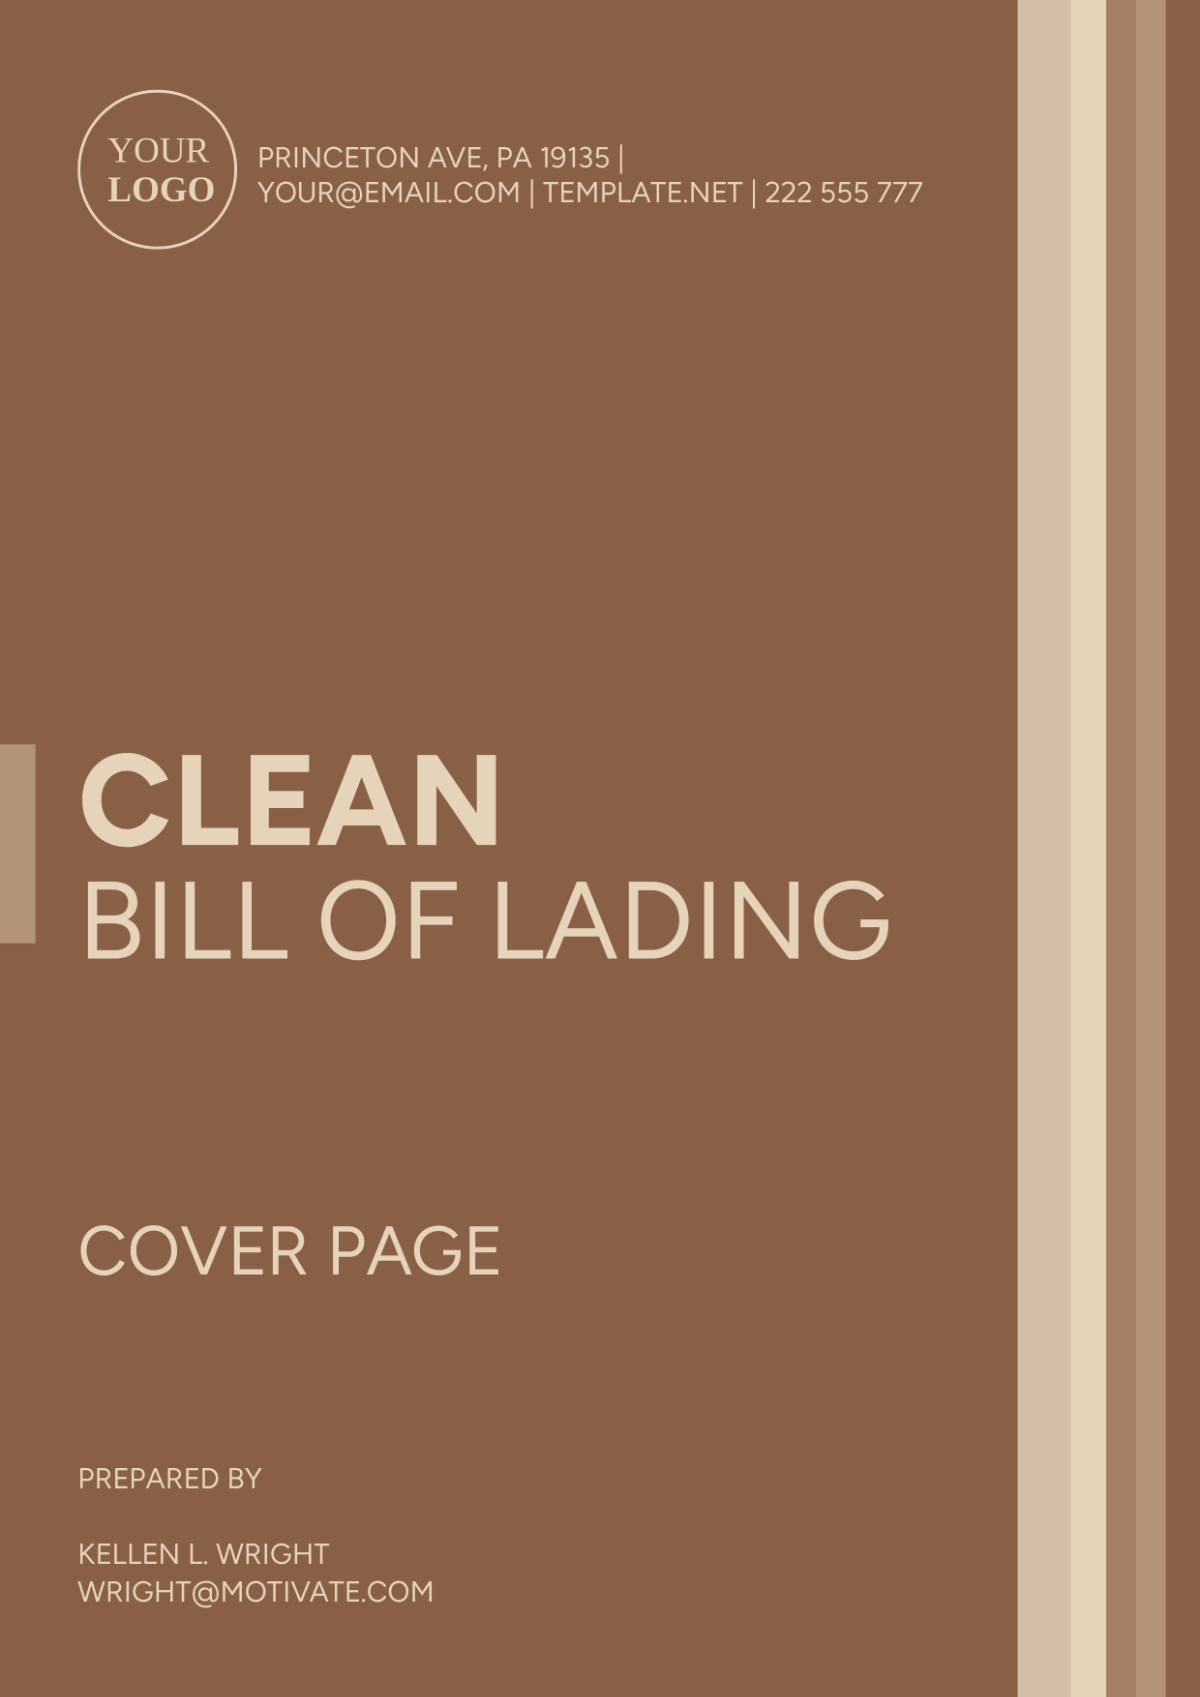 Clean Bill of Lading Cover Page